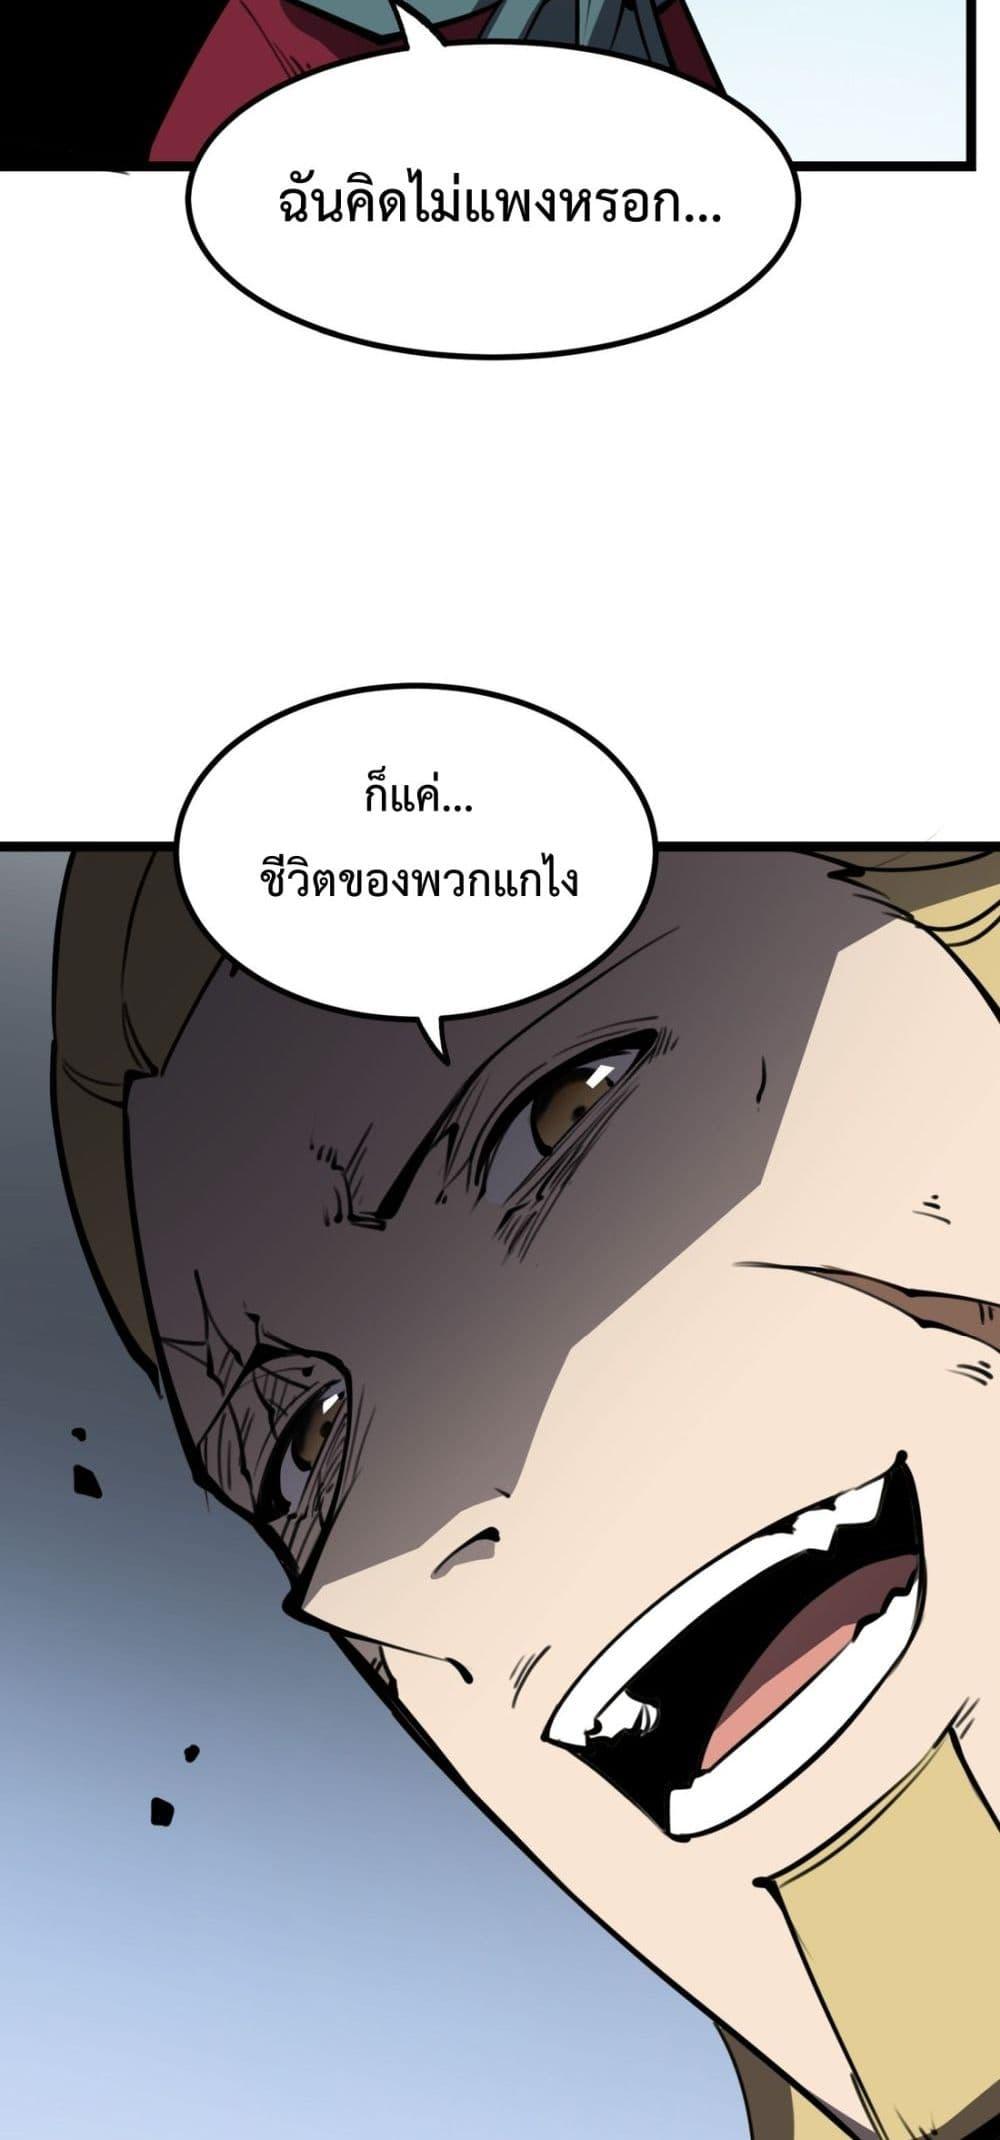 I Became The King by Scavenging ตอนที่ 15 (15)